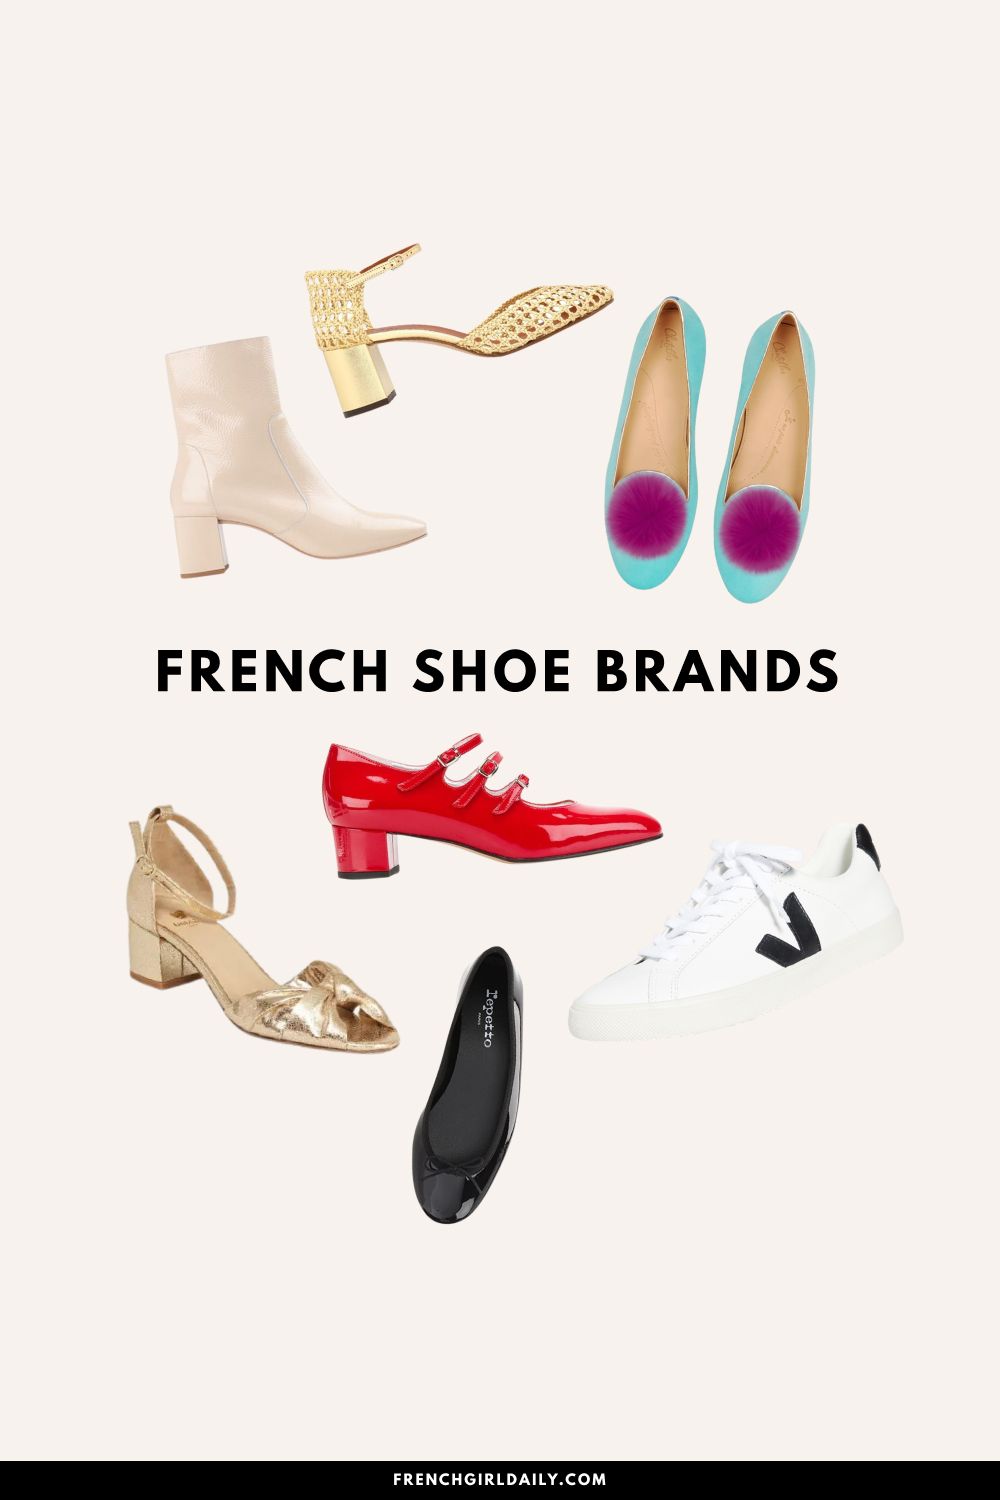 Best French Shoe Brands